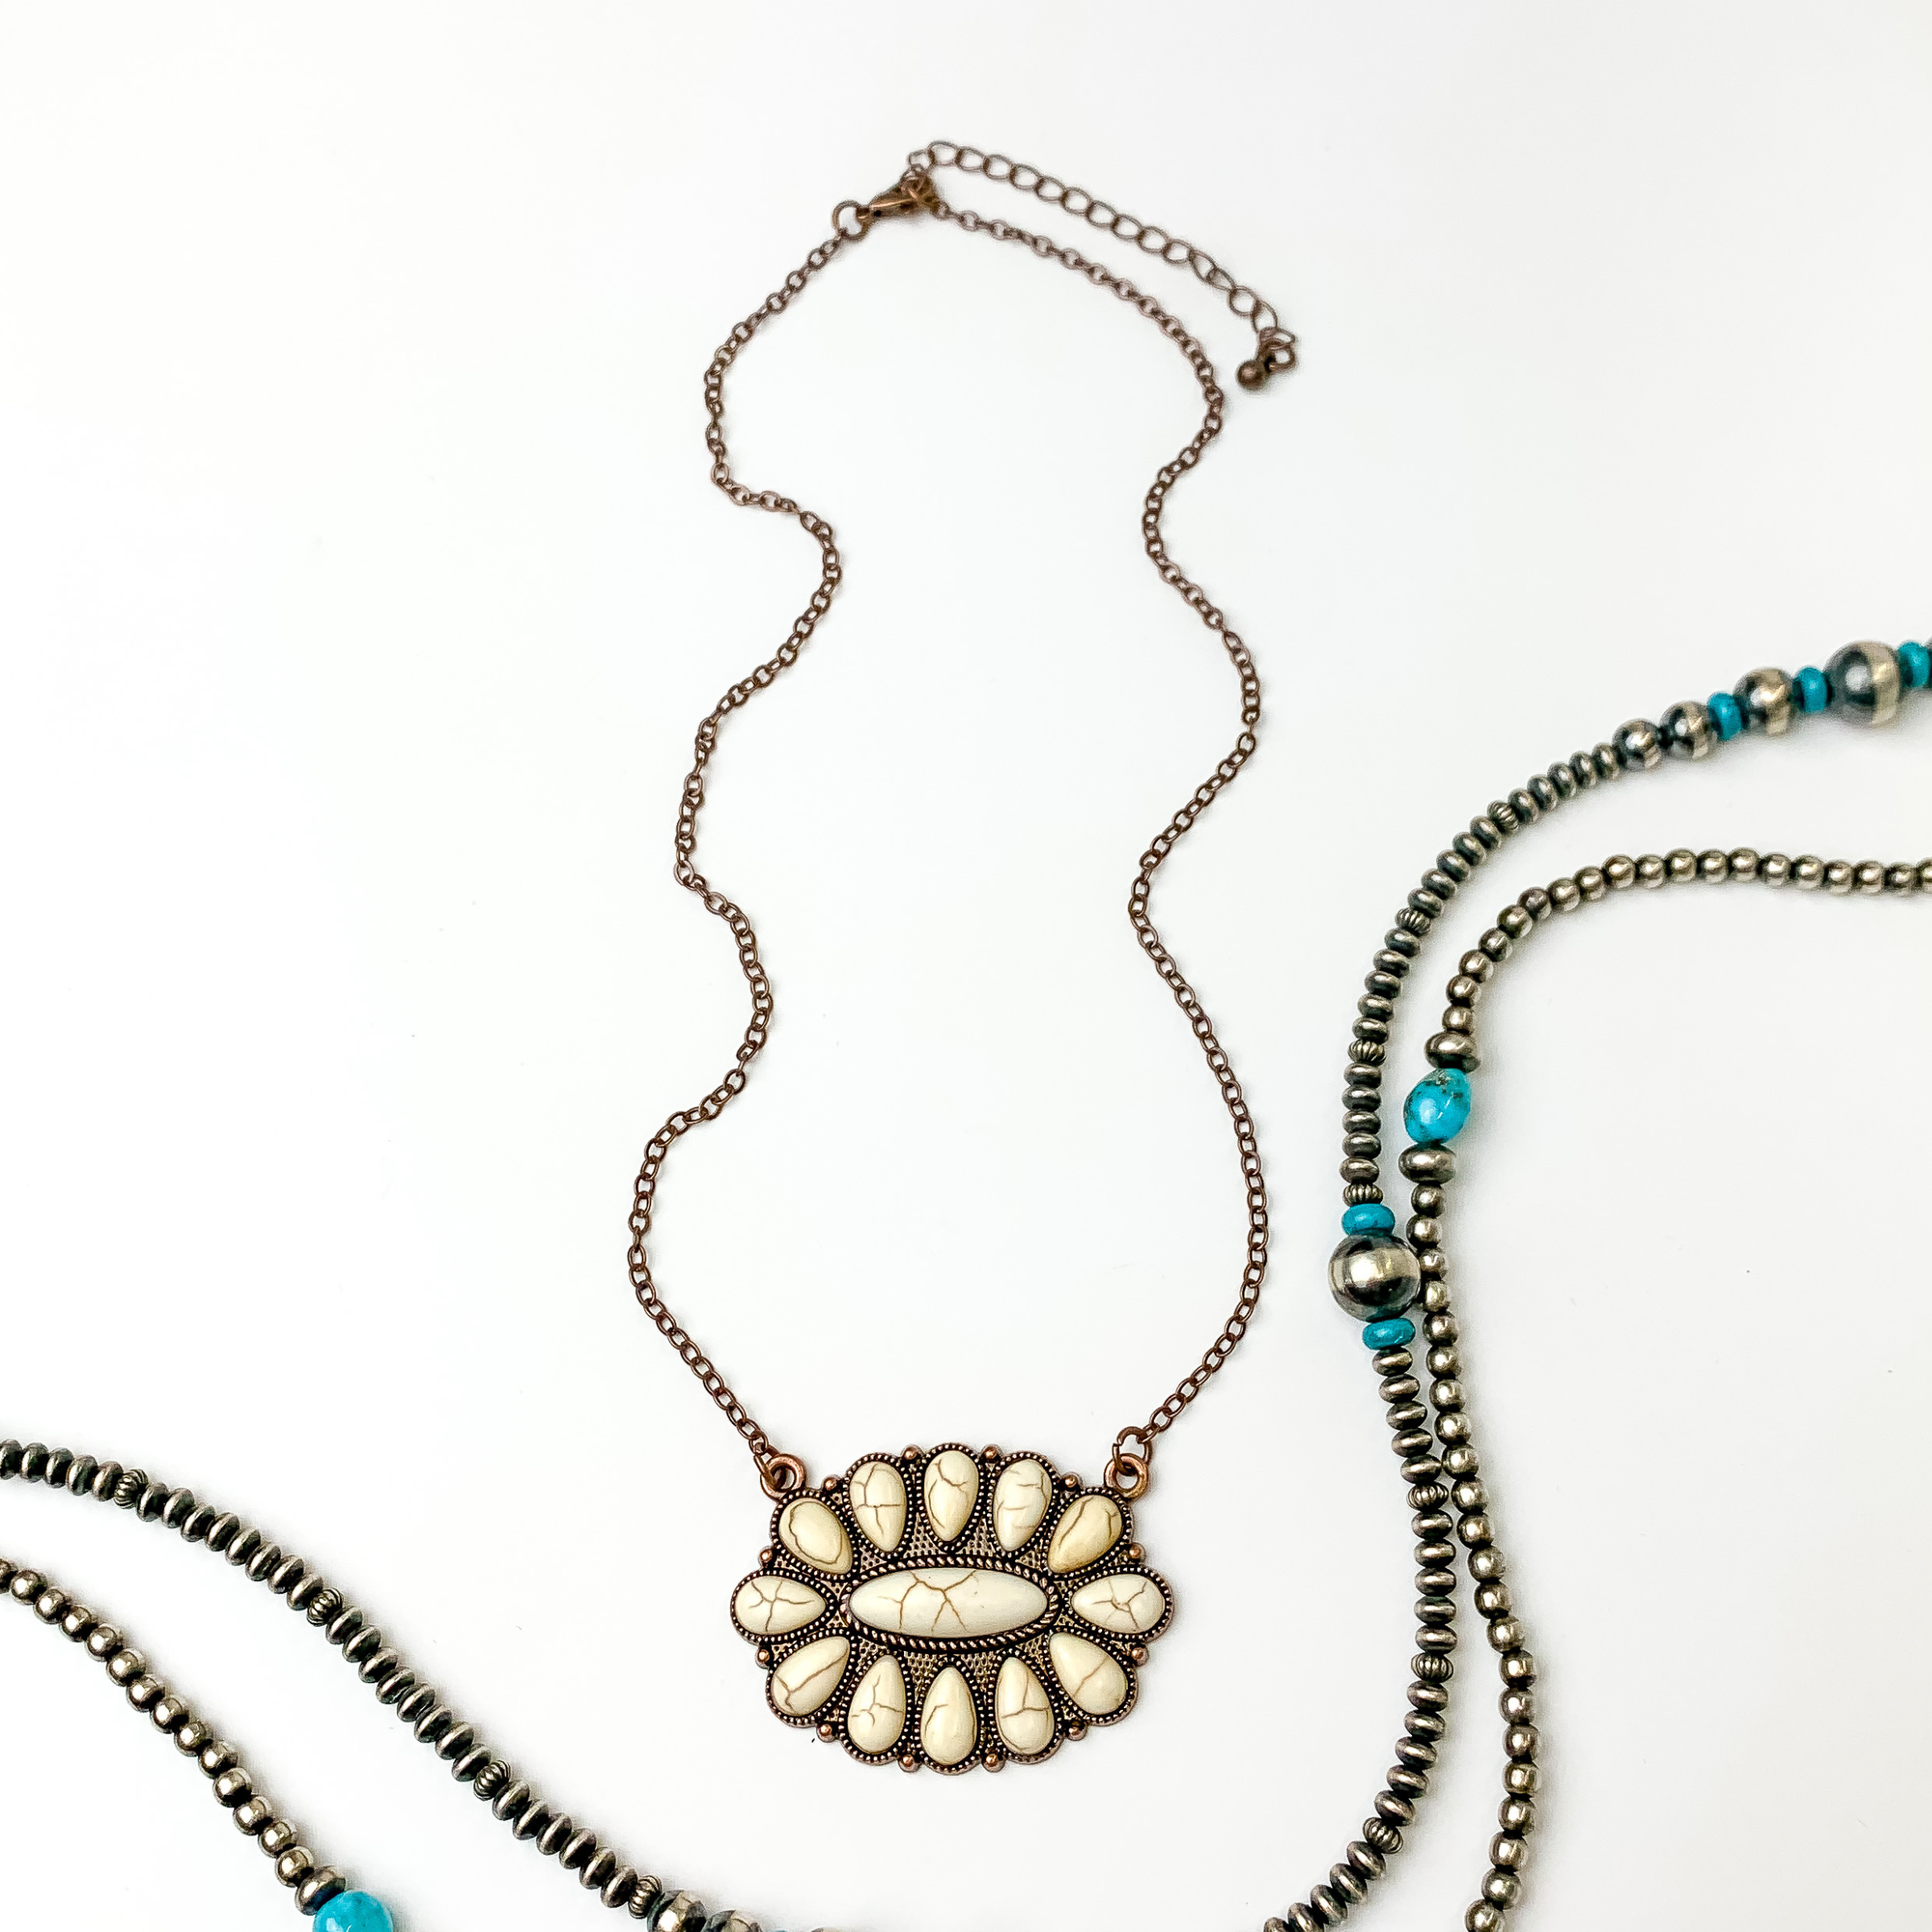 Copper chain necklace with oval cluster pendant. This pendant is made up of ivory stones. This necklace is pictured on an white background with silver and turquoise beads on the right side of the picture.